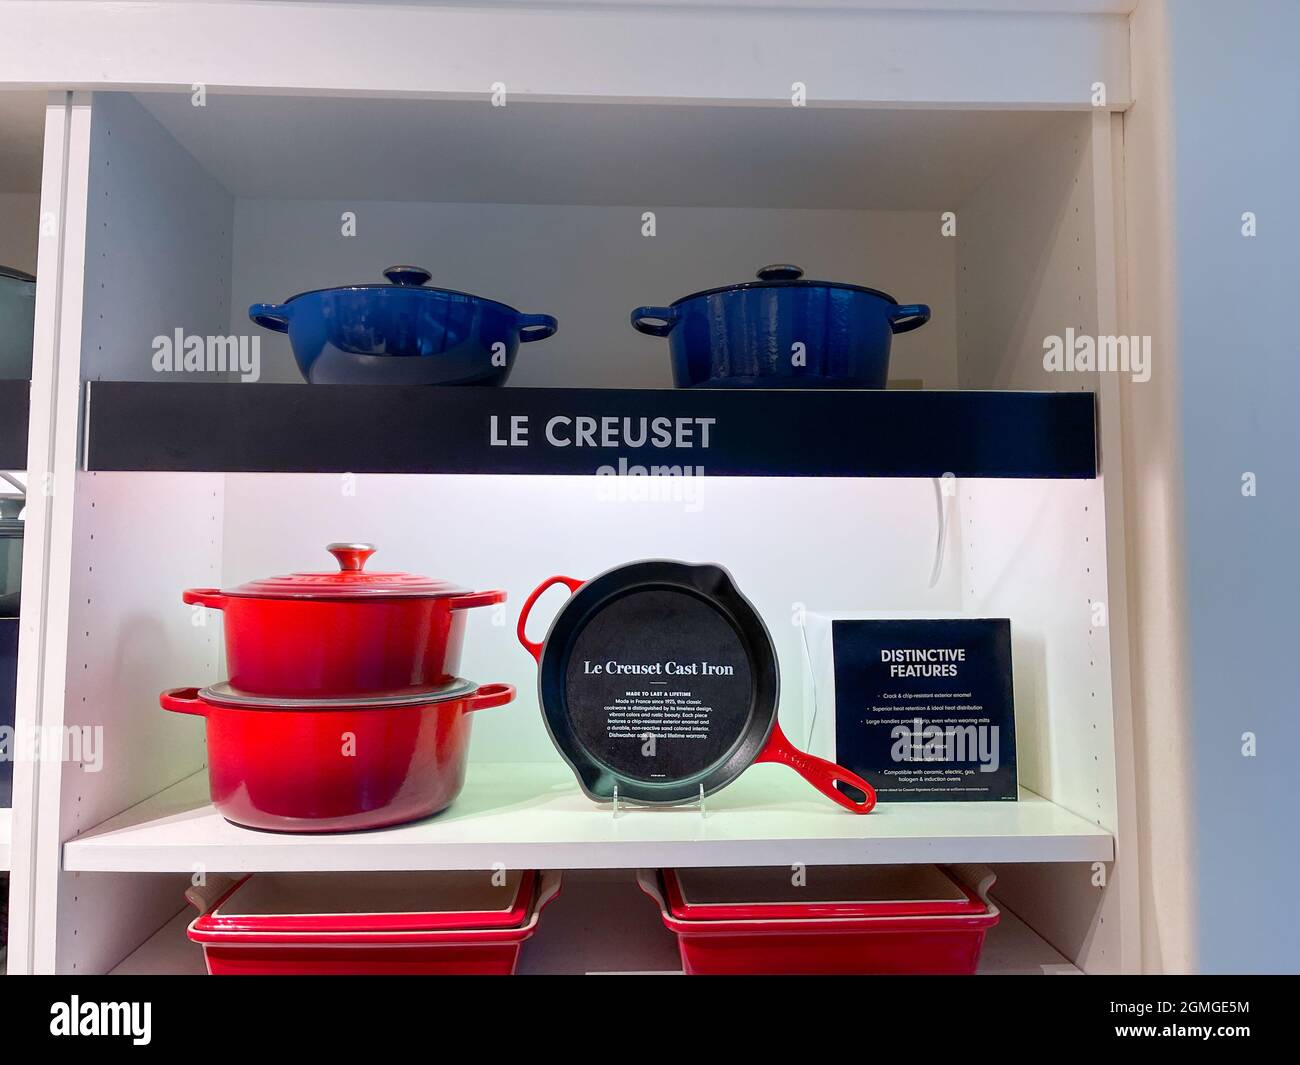 Le Creuset outlet☺️, Gallery posted by lizastian